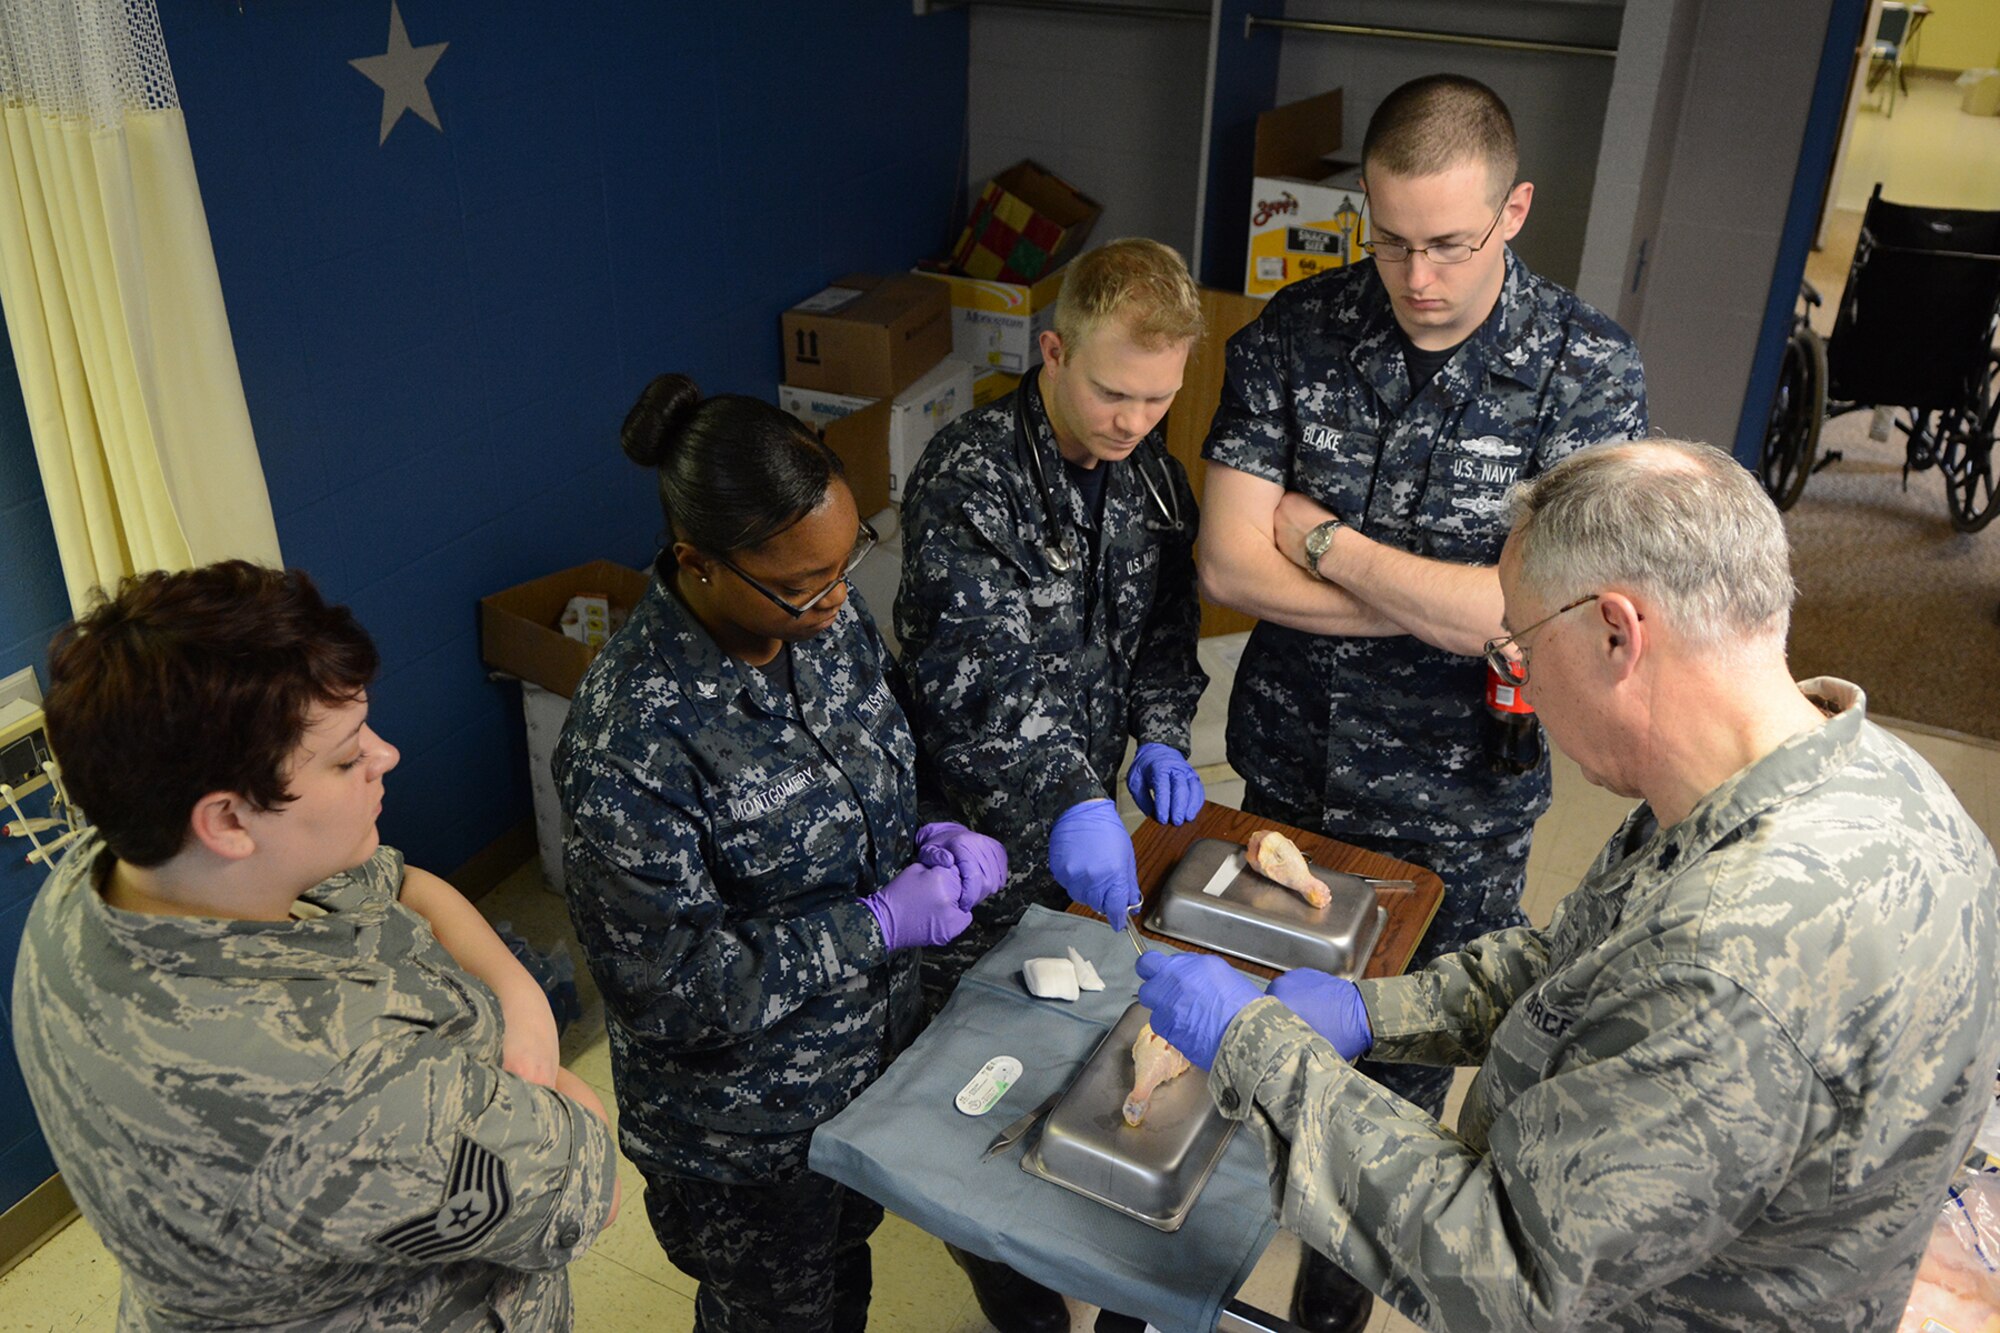 Navy and Air National Guard personnel use a chicken leg to practice putting sutures in a cut during Cajun Care 2014 in Abbeville, La., March 2, 2014. The different services used the 10-day mission to train together, and provide health, dental and optometry services to local residents of Abbeville, La., and the surrounding areas. (Air National Guard photo by Senior Airman Andrea F. Liechti)